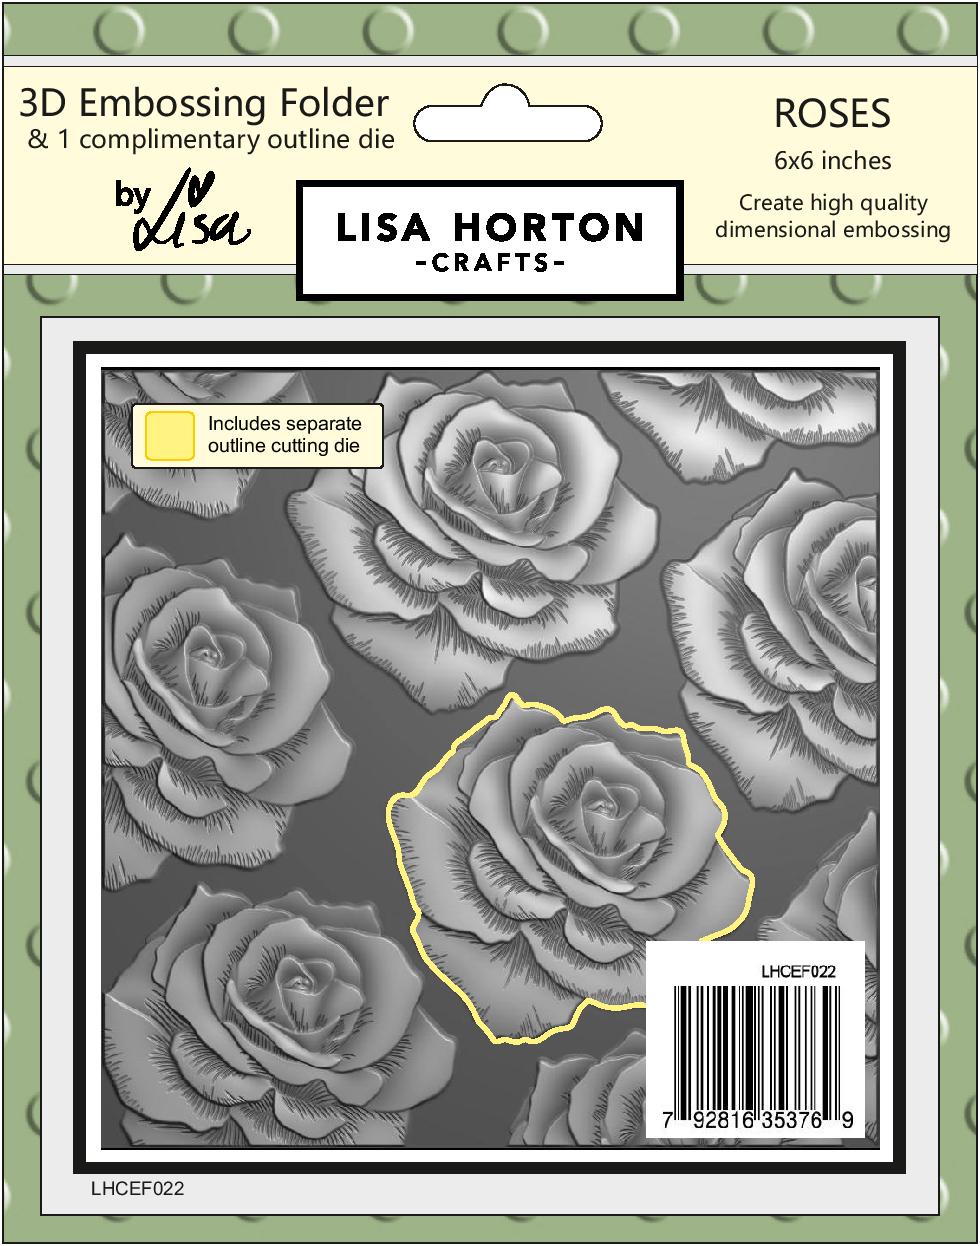 Roses 6x6 3D Embossing Folder With Cutting Die